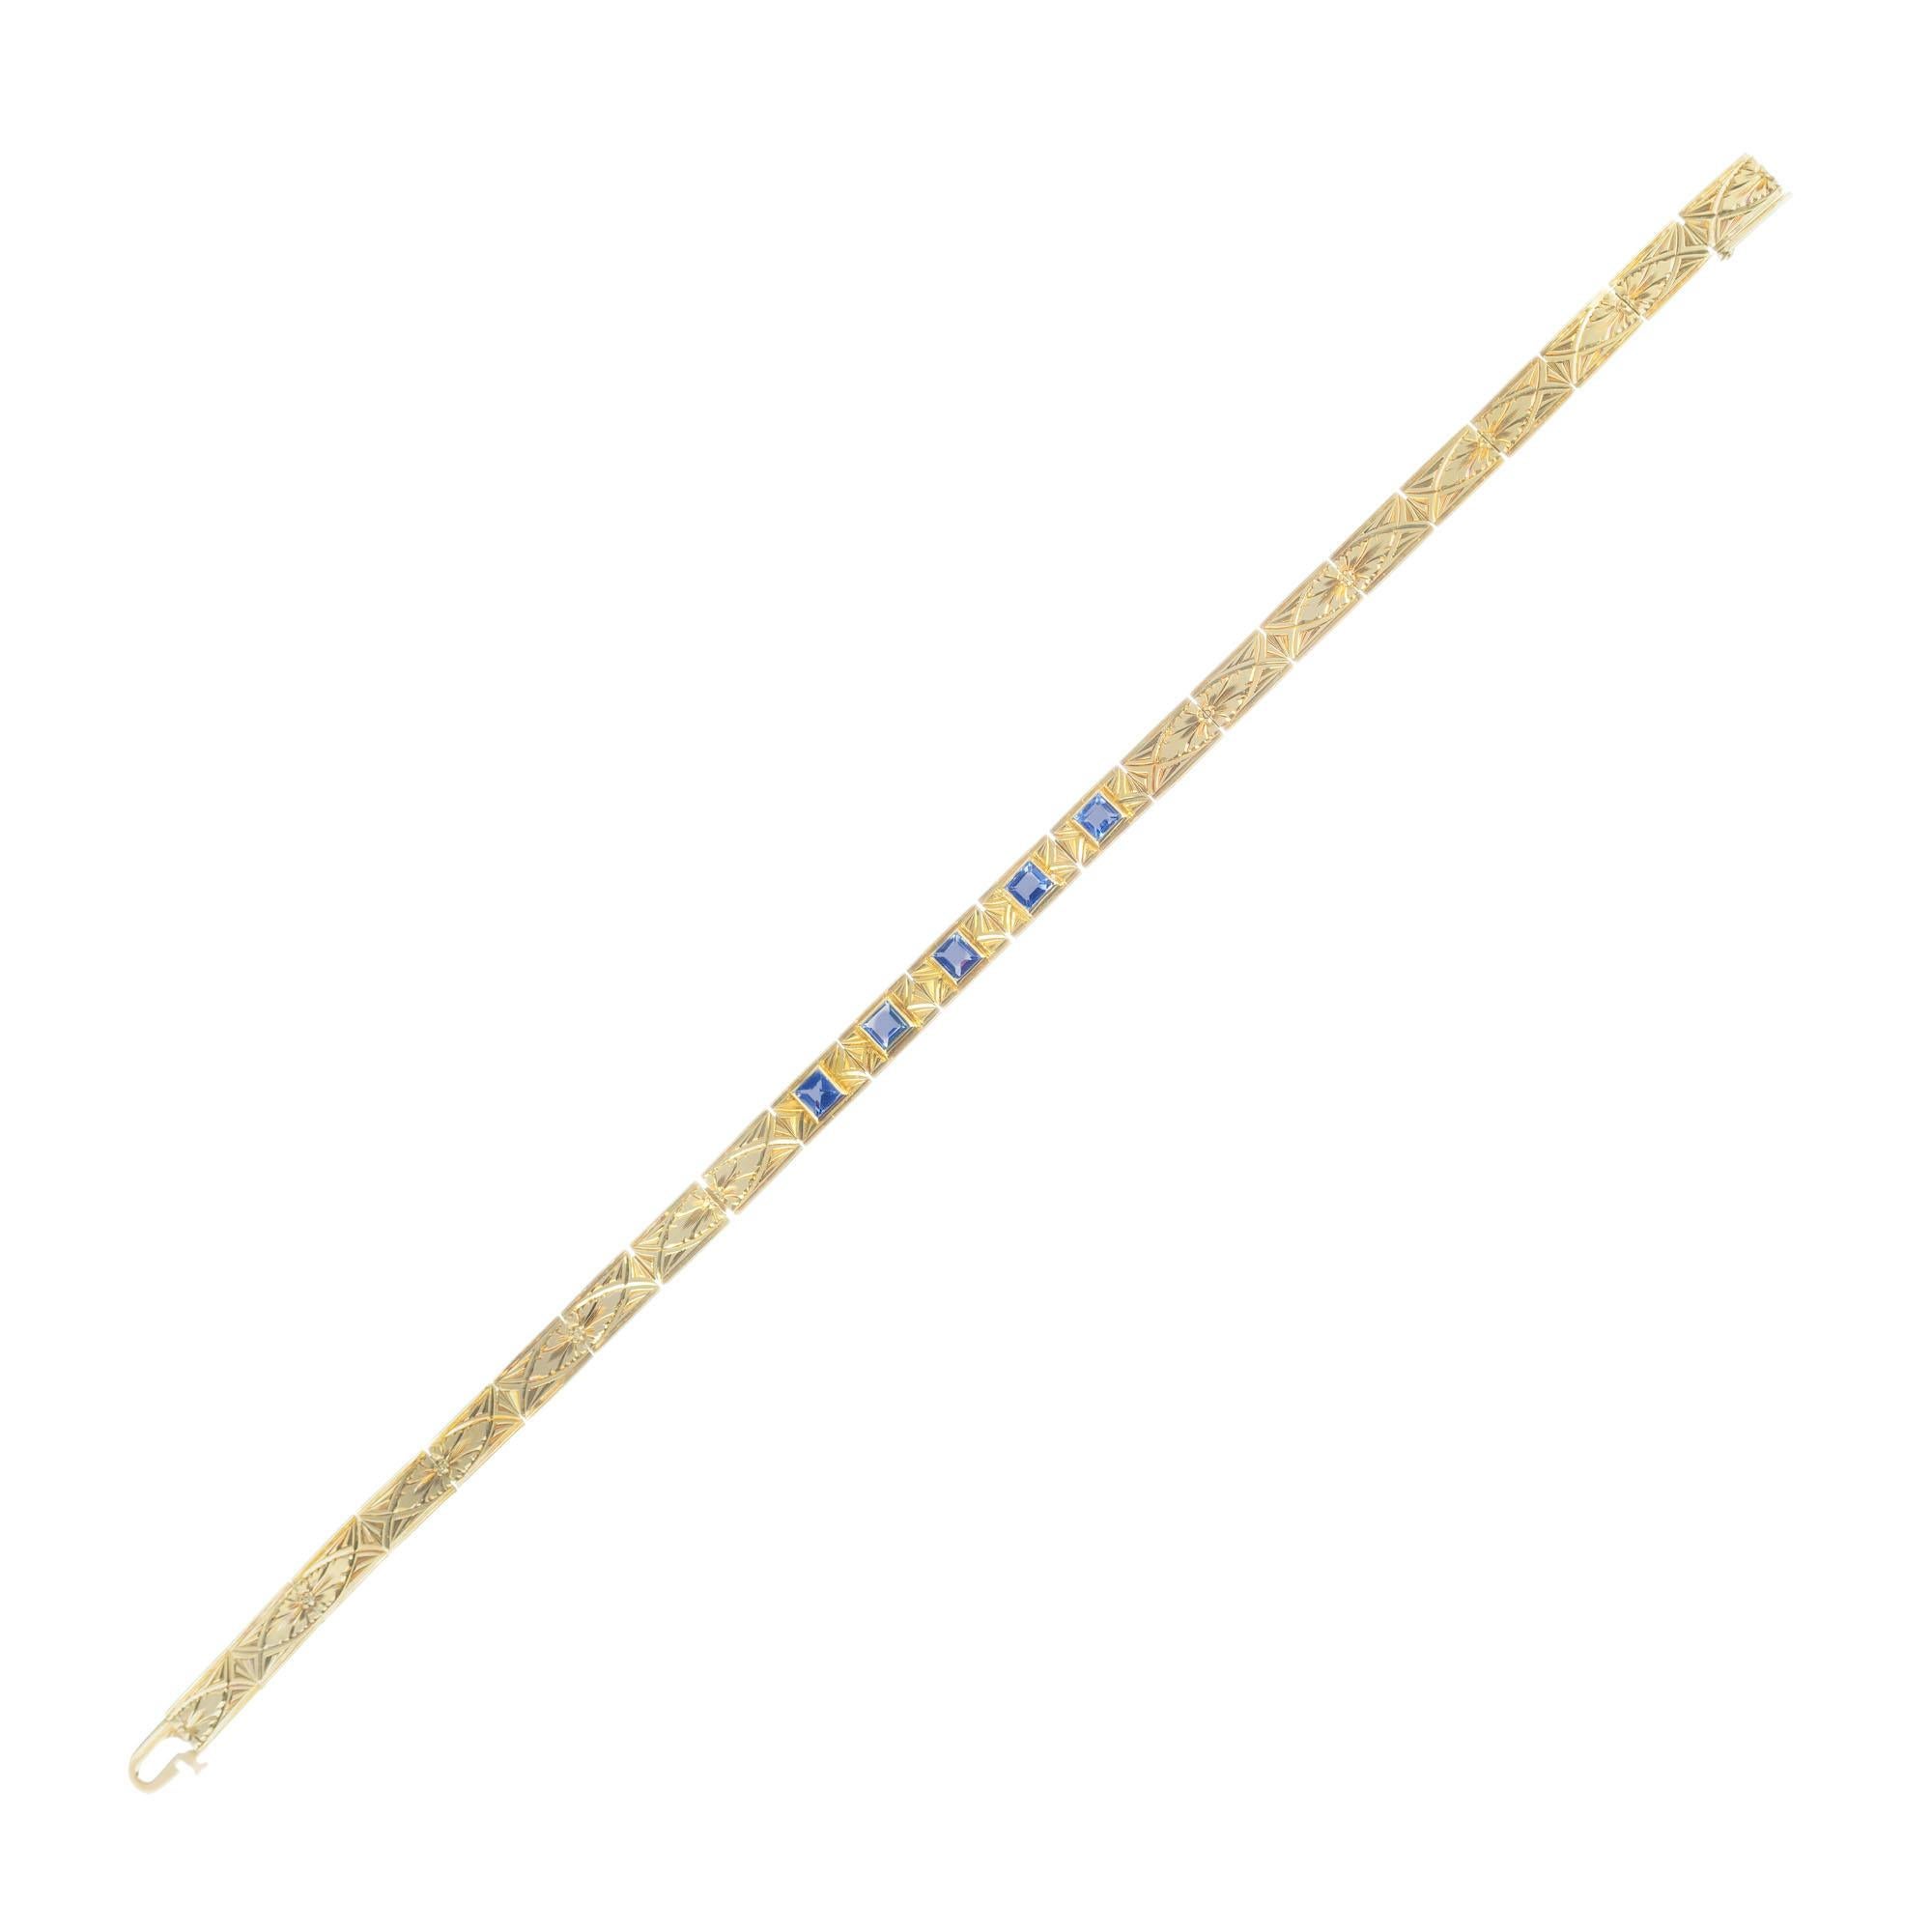 GIA certified Montana Yogo gulch square step cut sapphires in a handmade, hand engraved 14k yellow gold bracelet circa 1930's. Yogo gulch natural Montana sapphires. 8 inches in length.

5 step cut square blue Montana sapphires, VS approx. 1.15cts